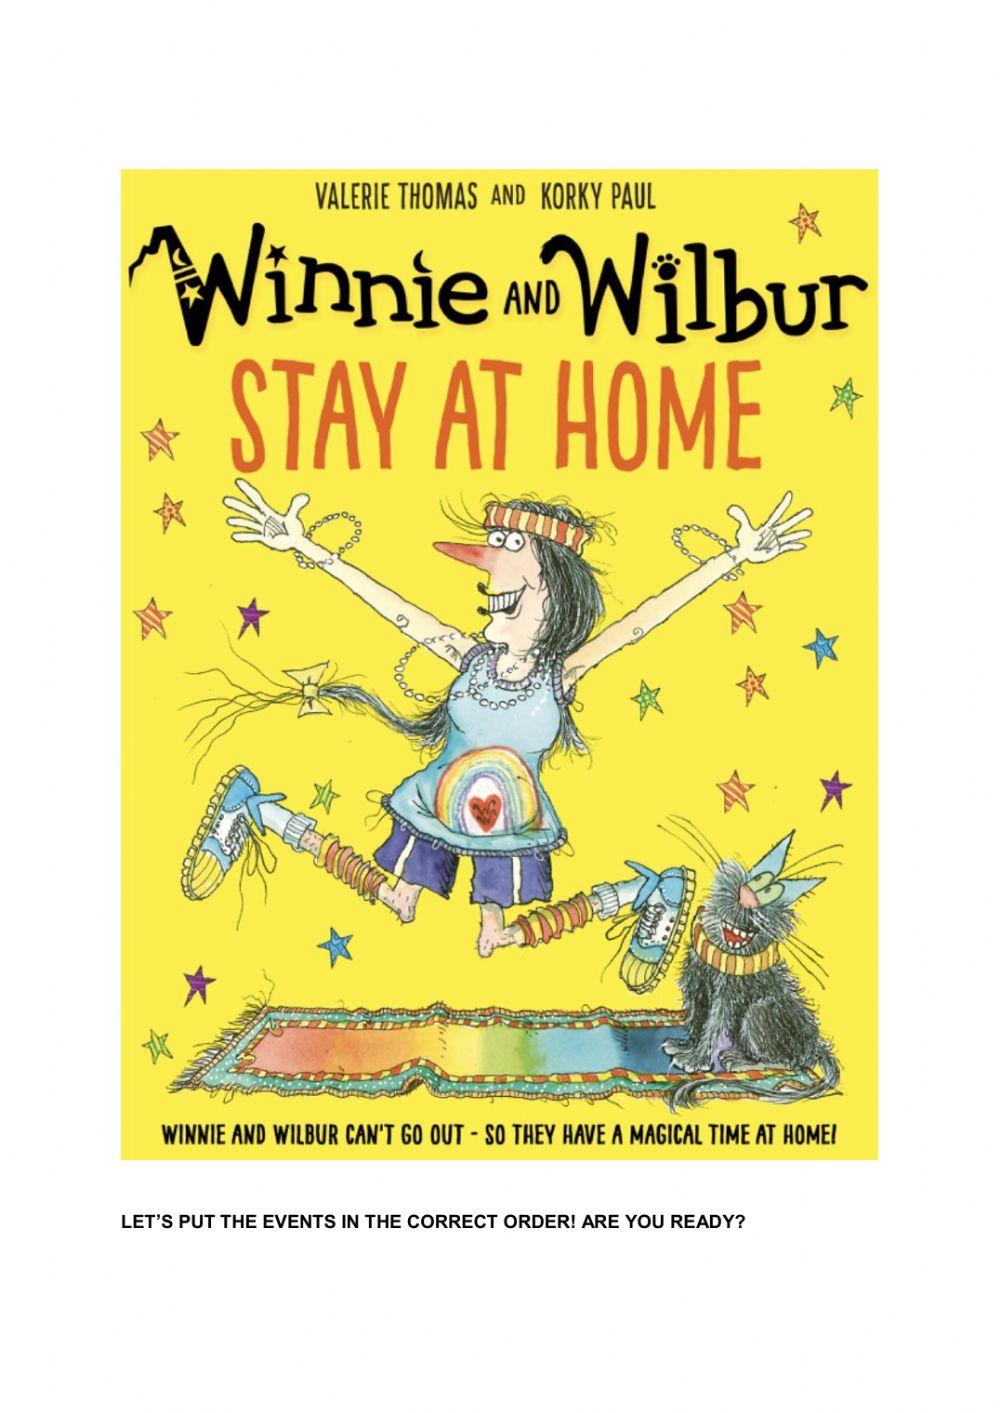 Winnie and wilbur stay at home